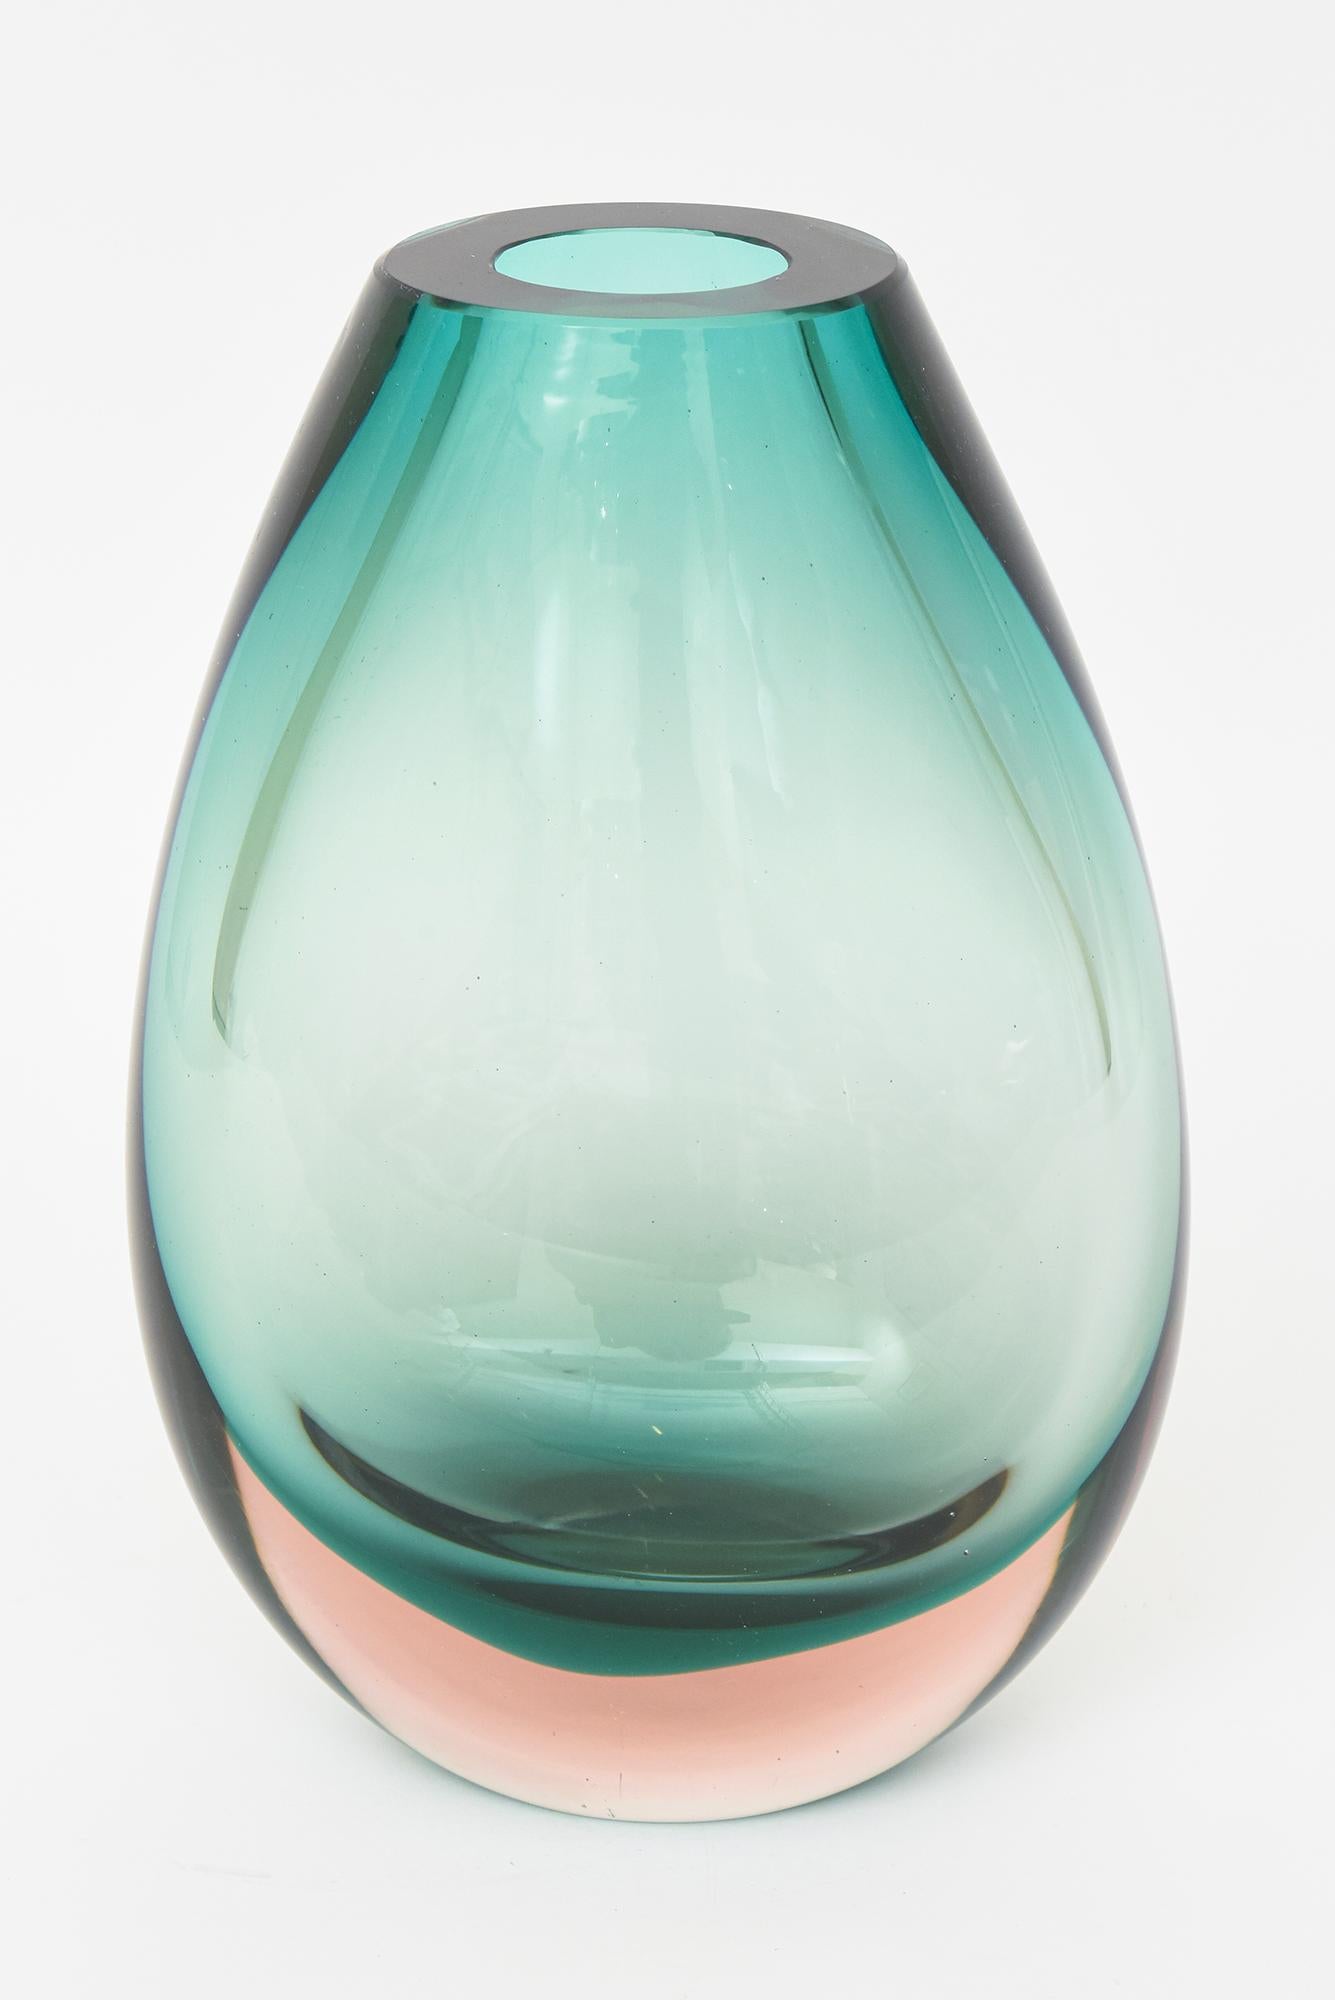 This stunning thick walled tear drop shaped vintage Murano sommerso hand blown glass vase or vessel is by Antonio da Ros for Cenedese. The color of the sea green light emerald teal layers into a peach colored half moon at the bottom with clear glass